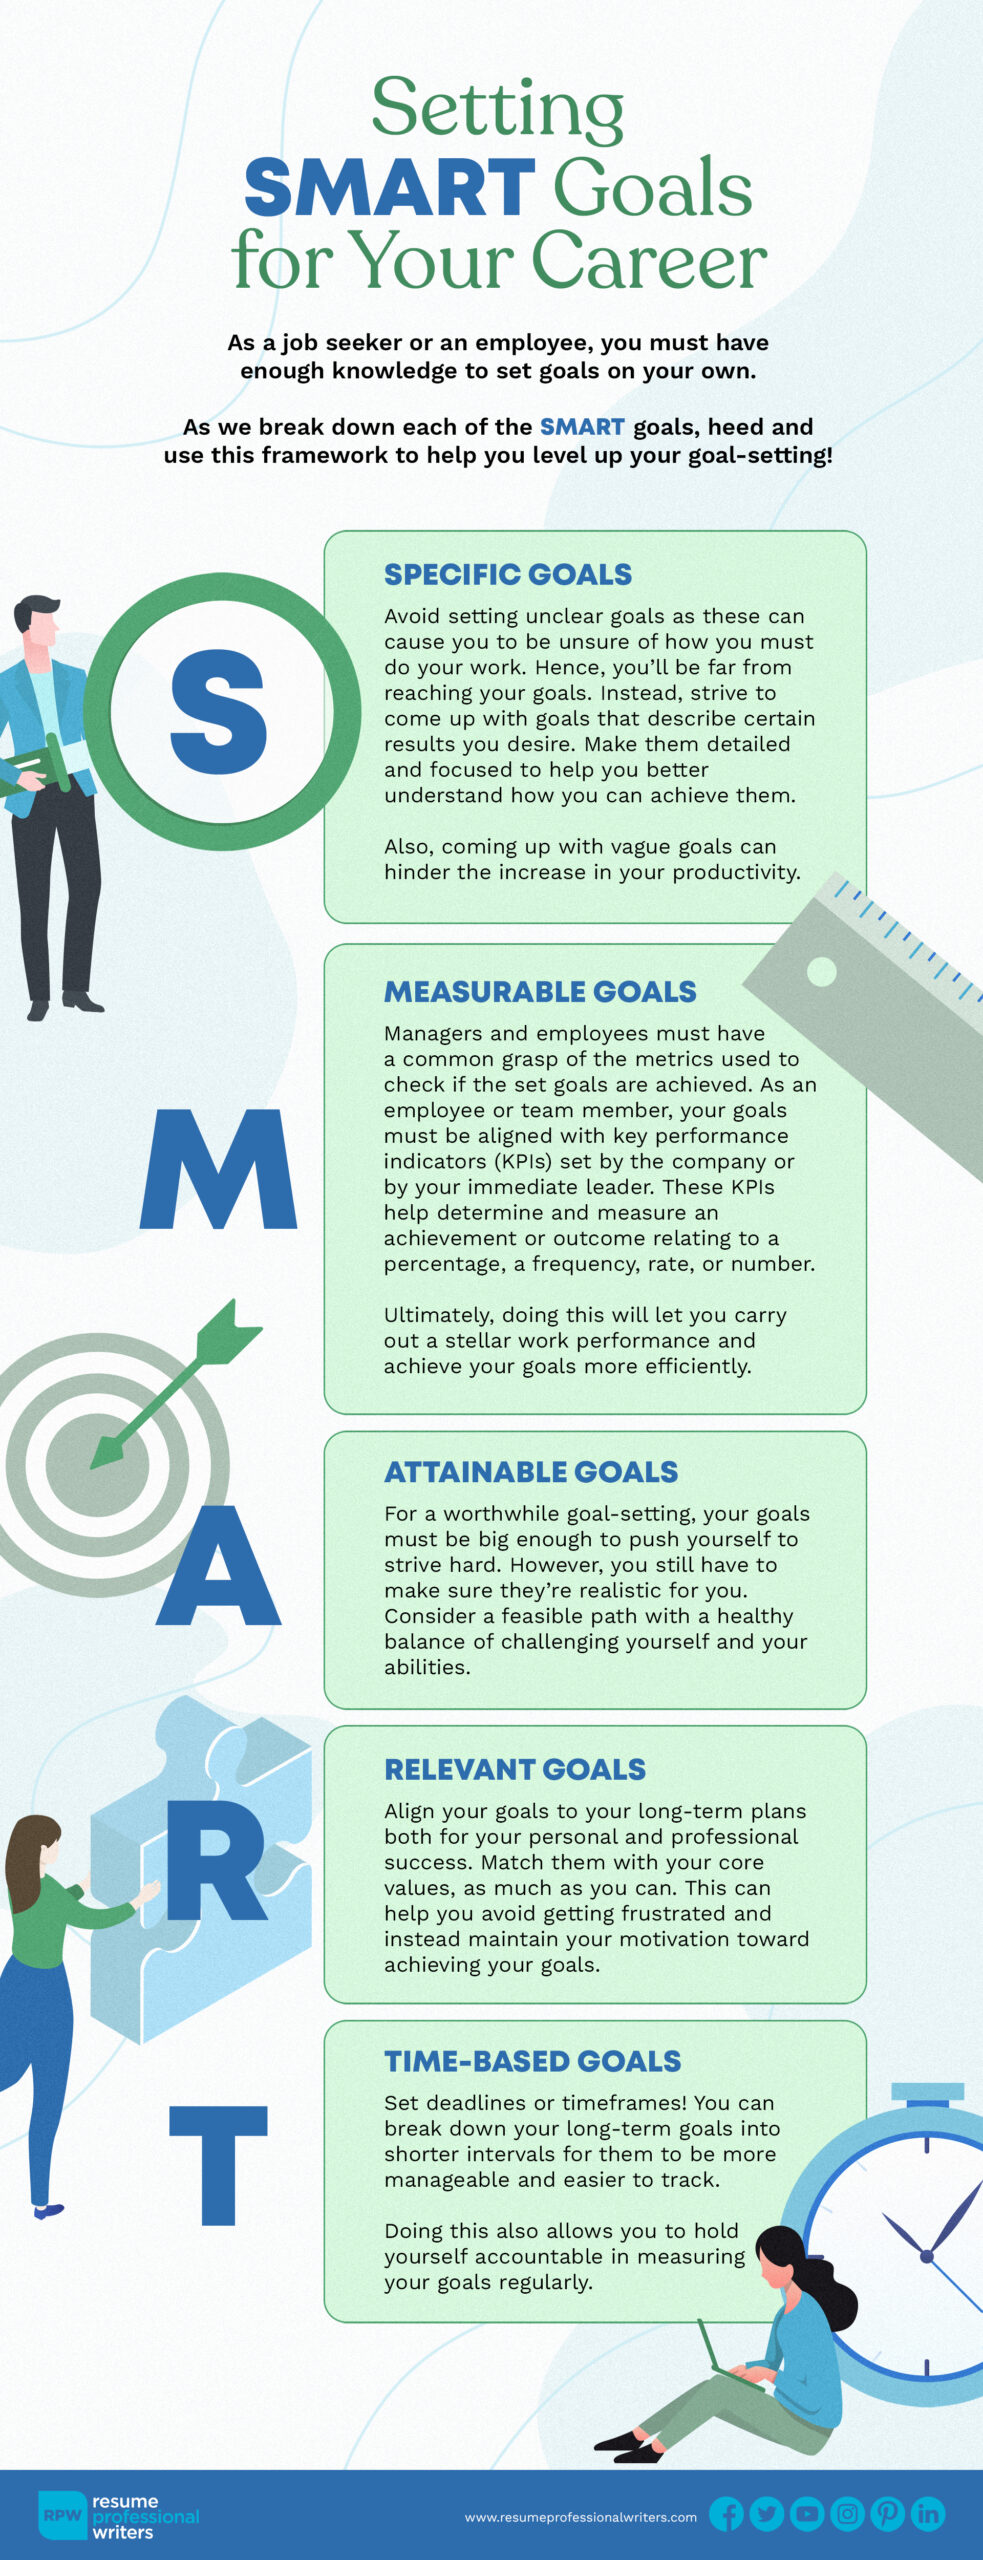 Examples Of Personal Smart Goals